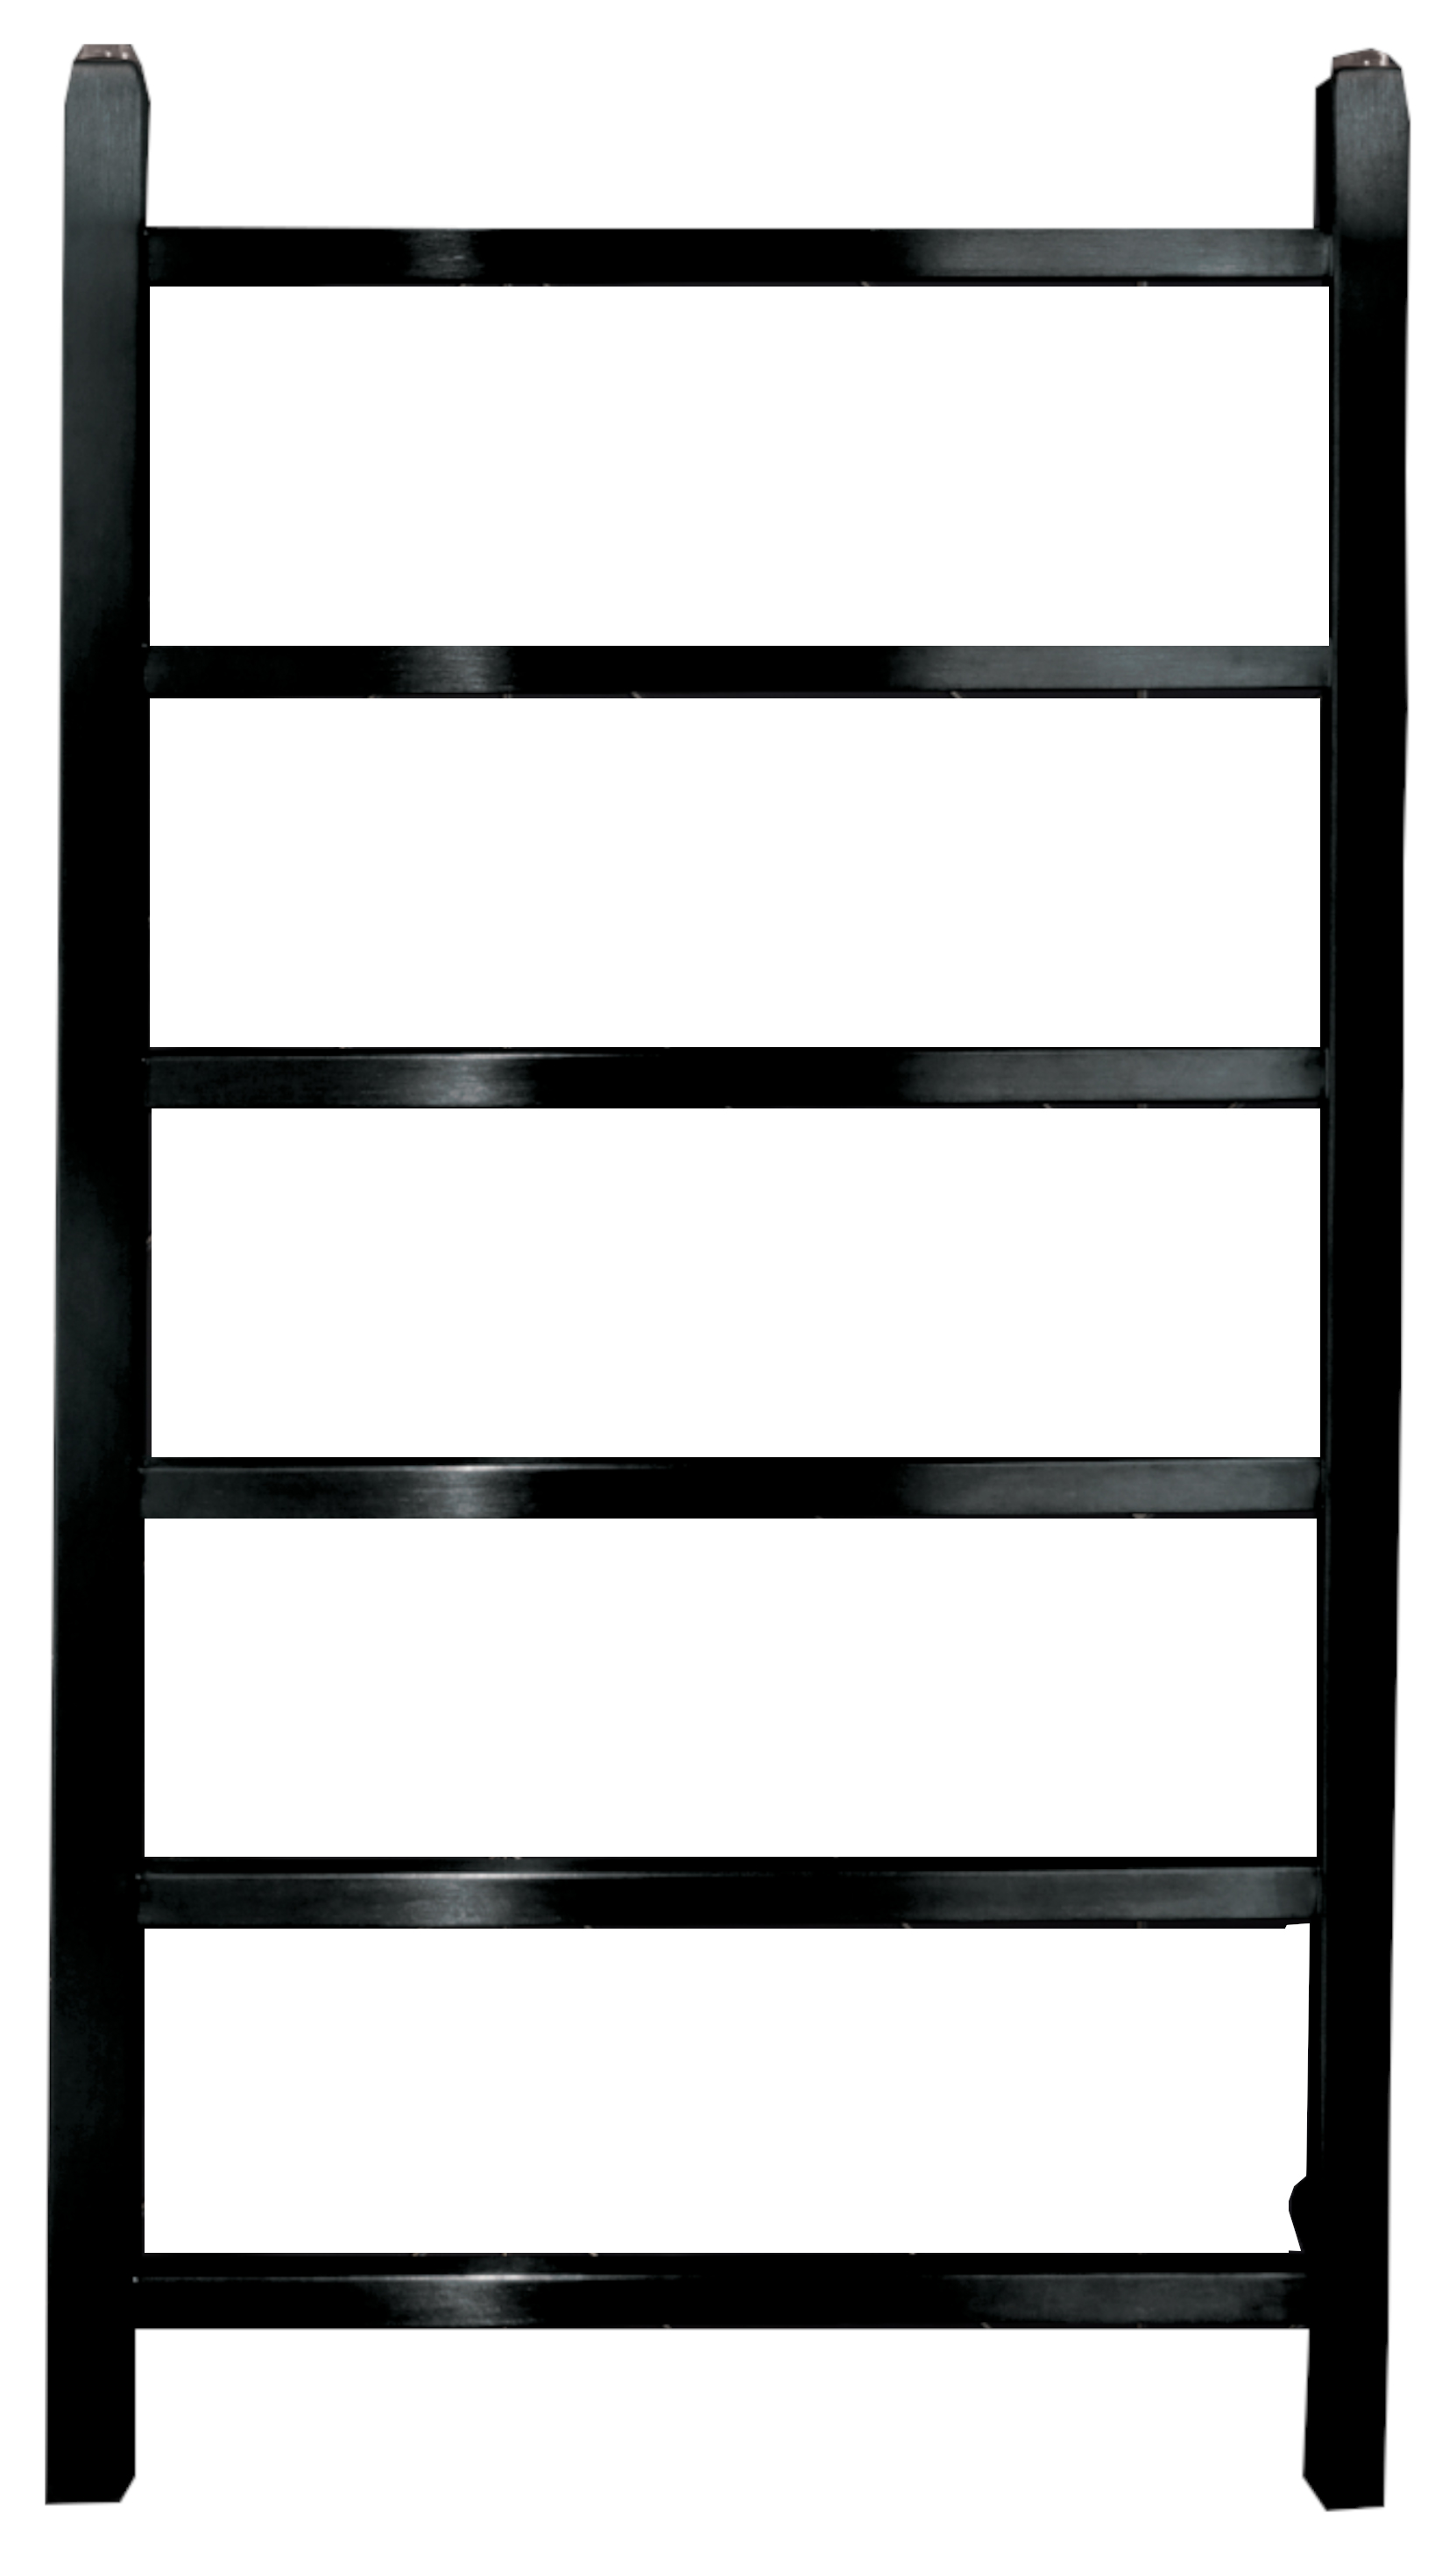 Towelrads Diva Brushed Black Chrome Dry Electric Non Thermostatic Towel Radiator - 800 x 500mm